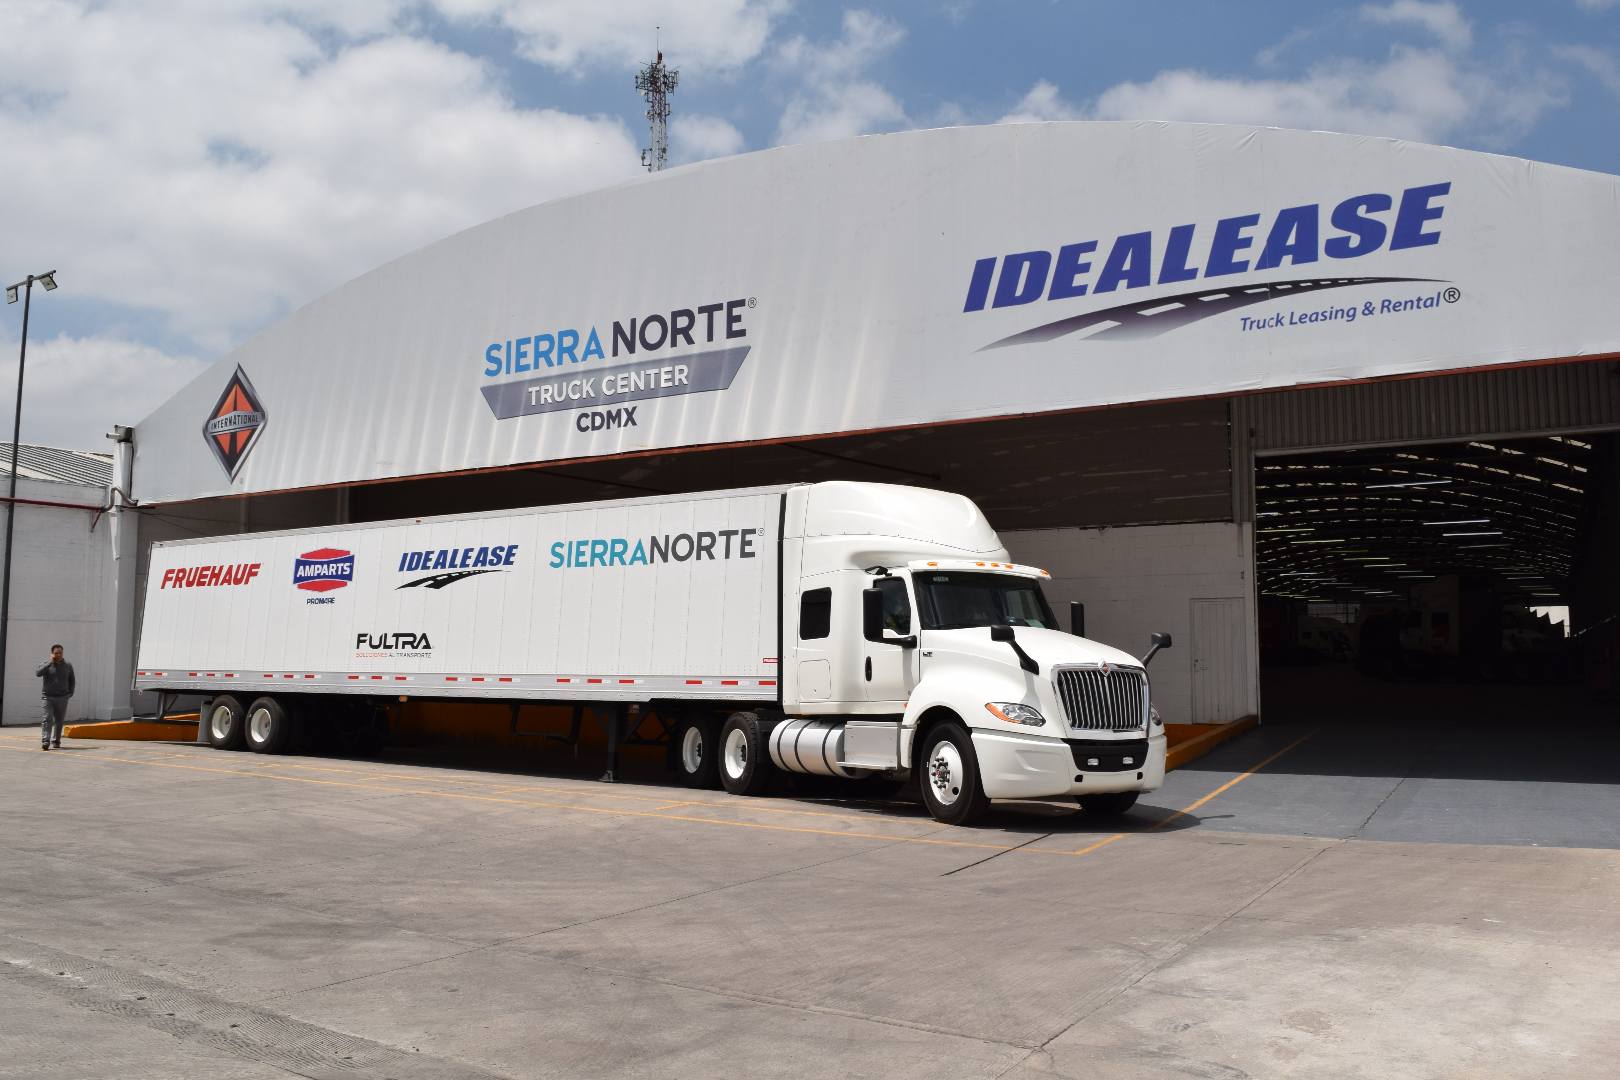 Distribution center is inaugurated in the State of Mexico